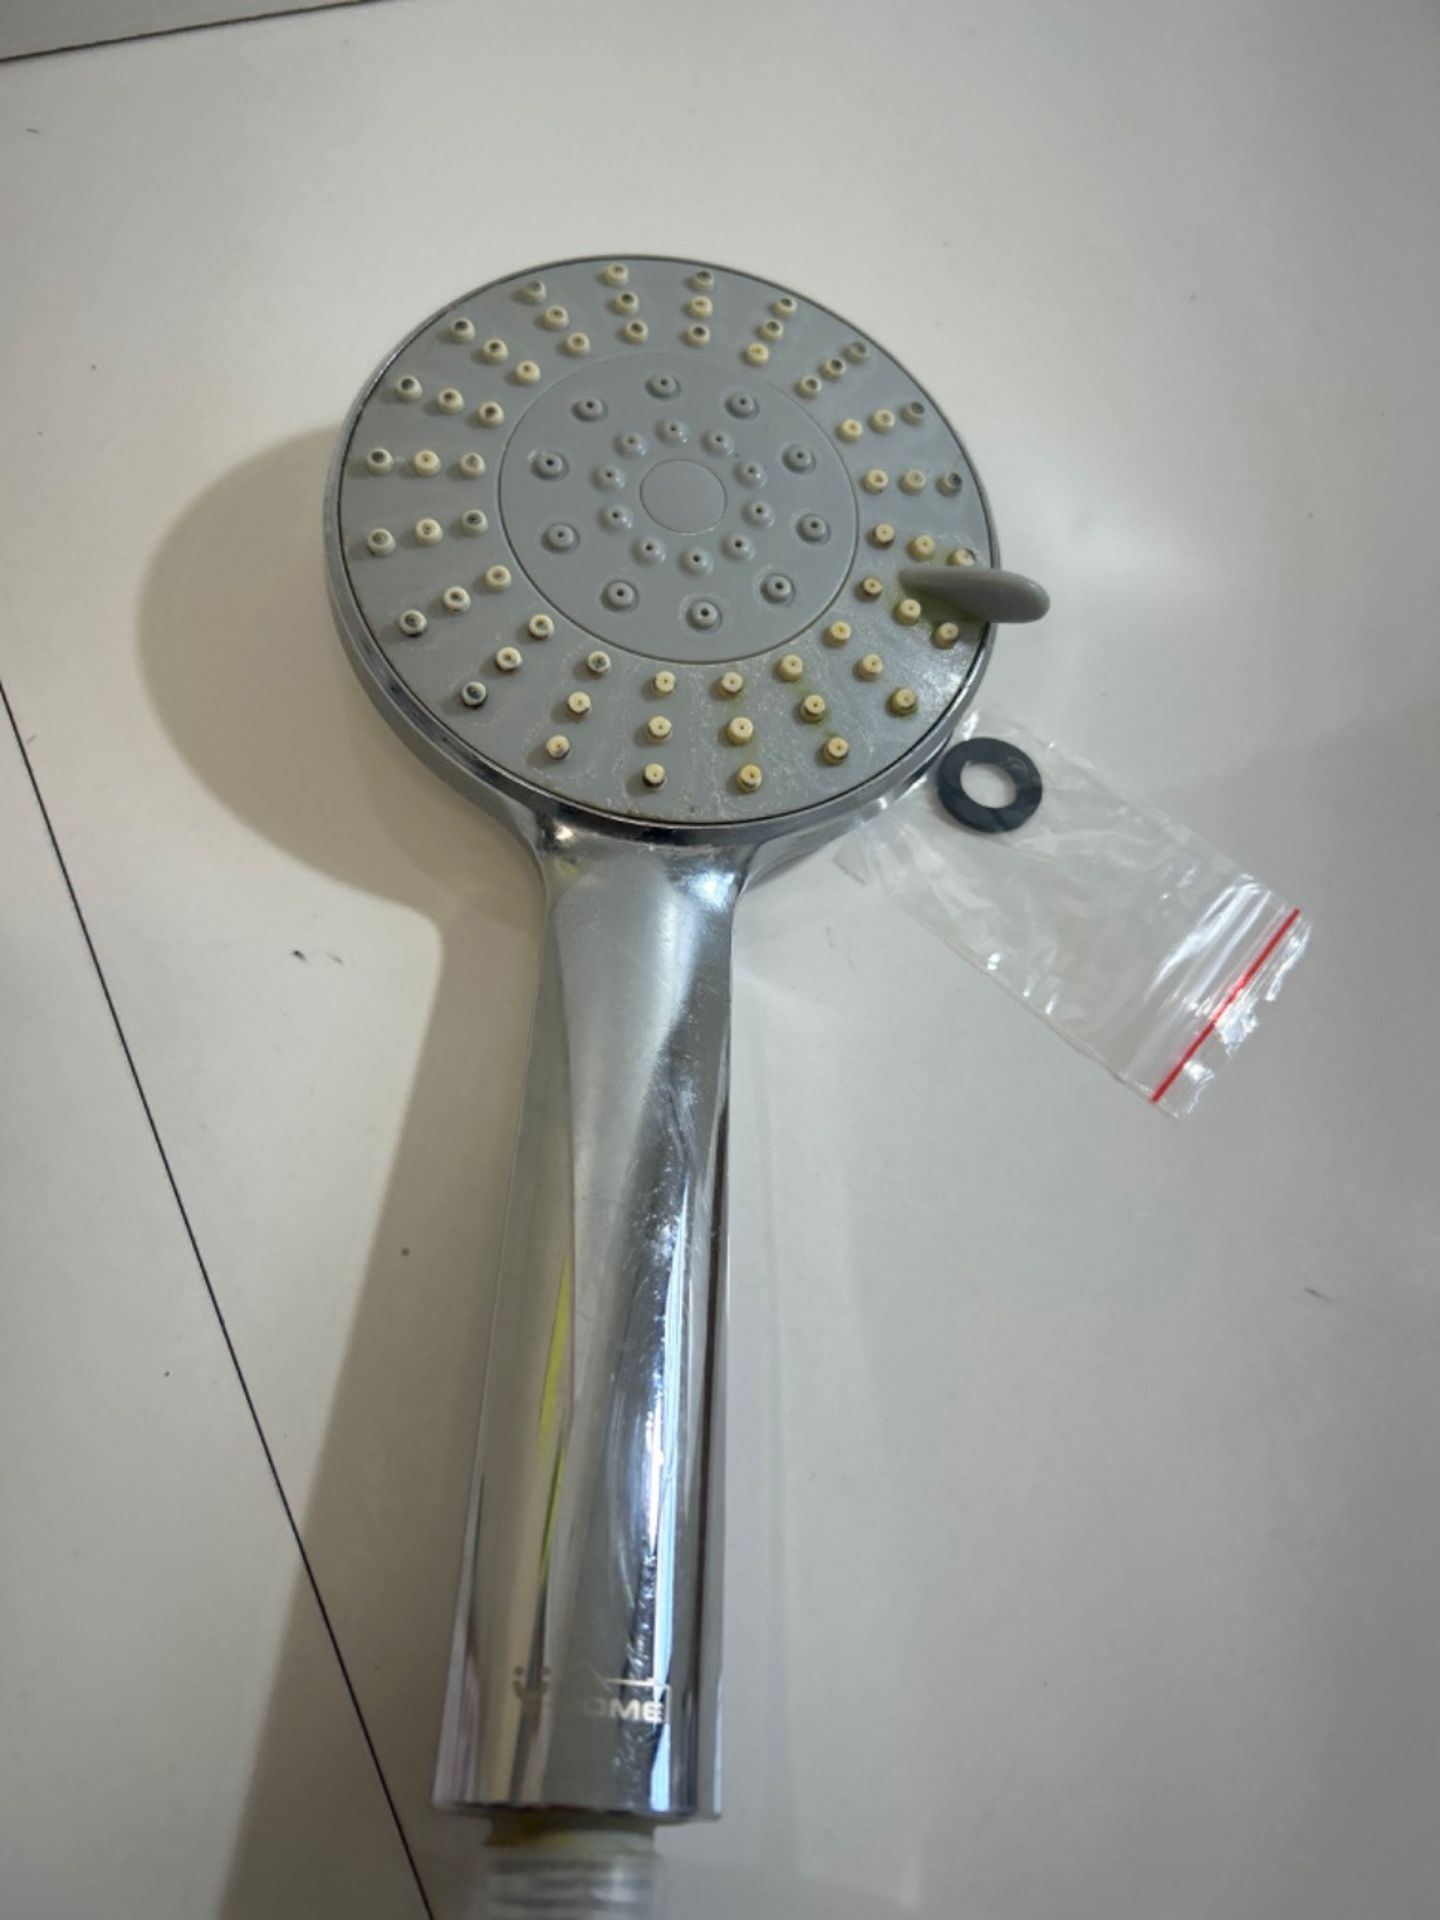 YiWeel Shower Head with Silicone Outlet,Silk Rain Design Handheld Shower Head 3 Mode - Image 2 of 3